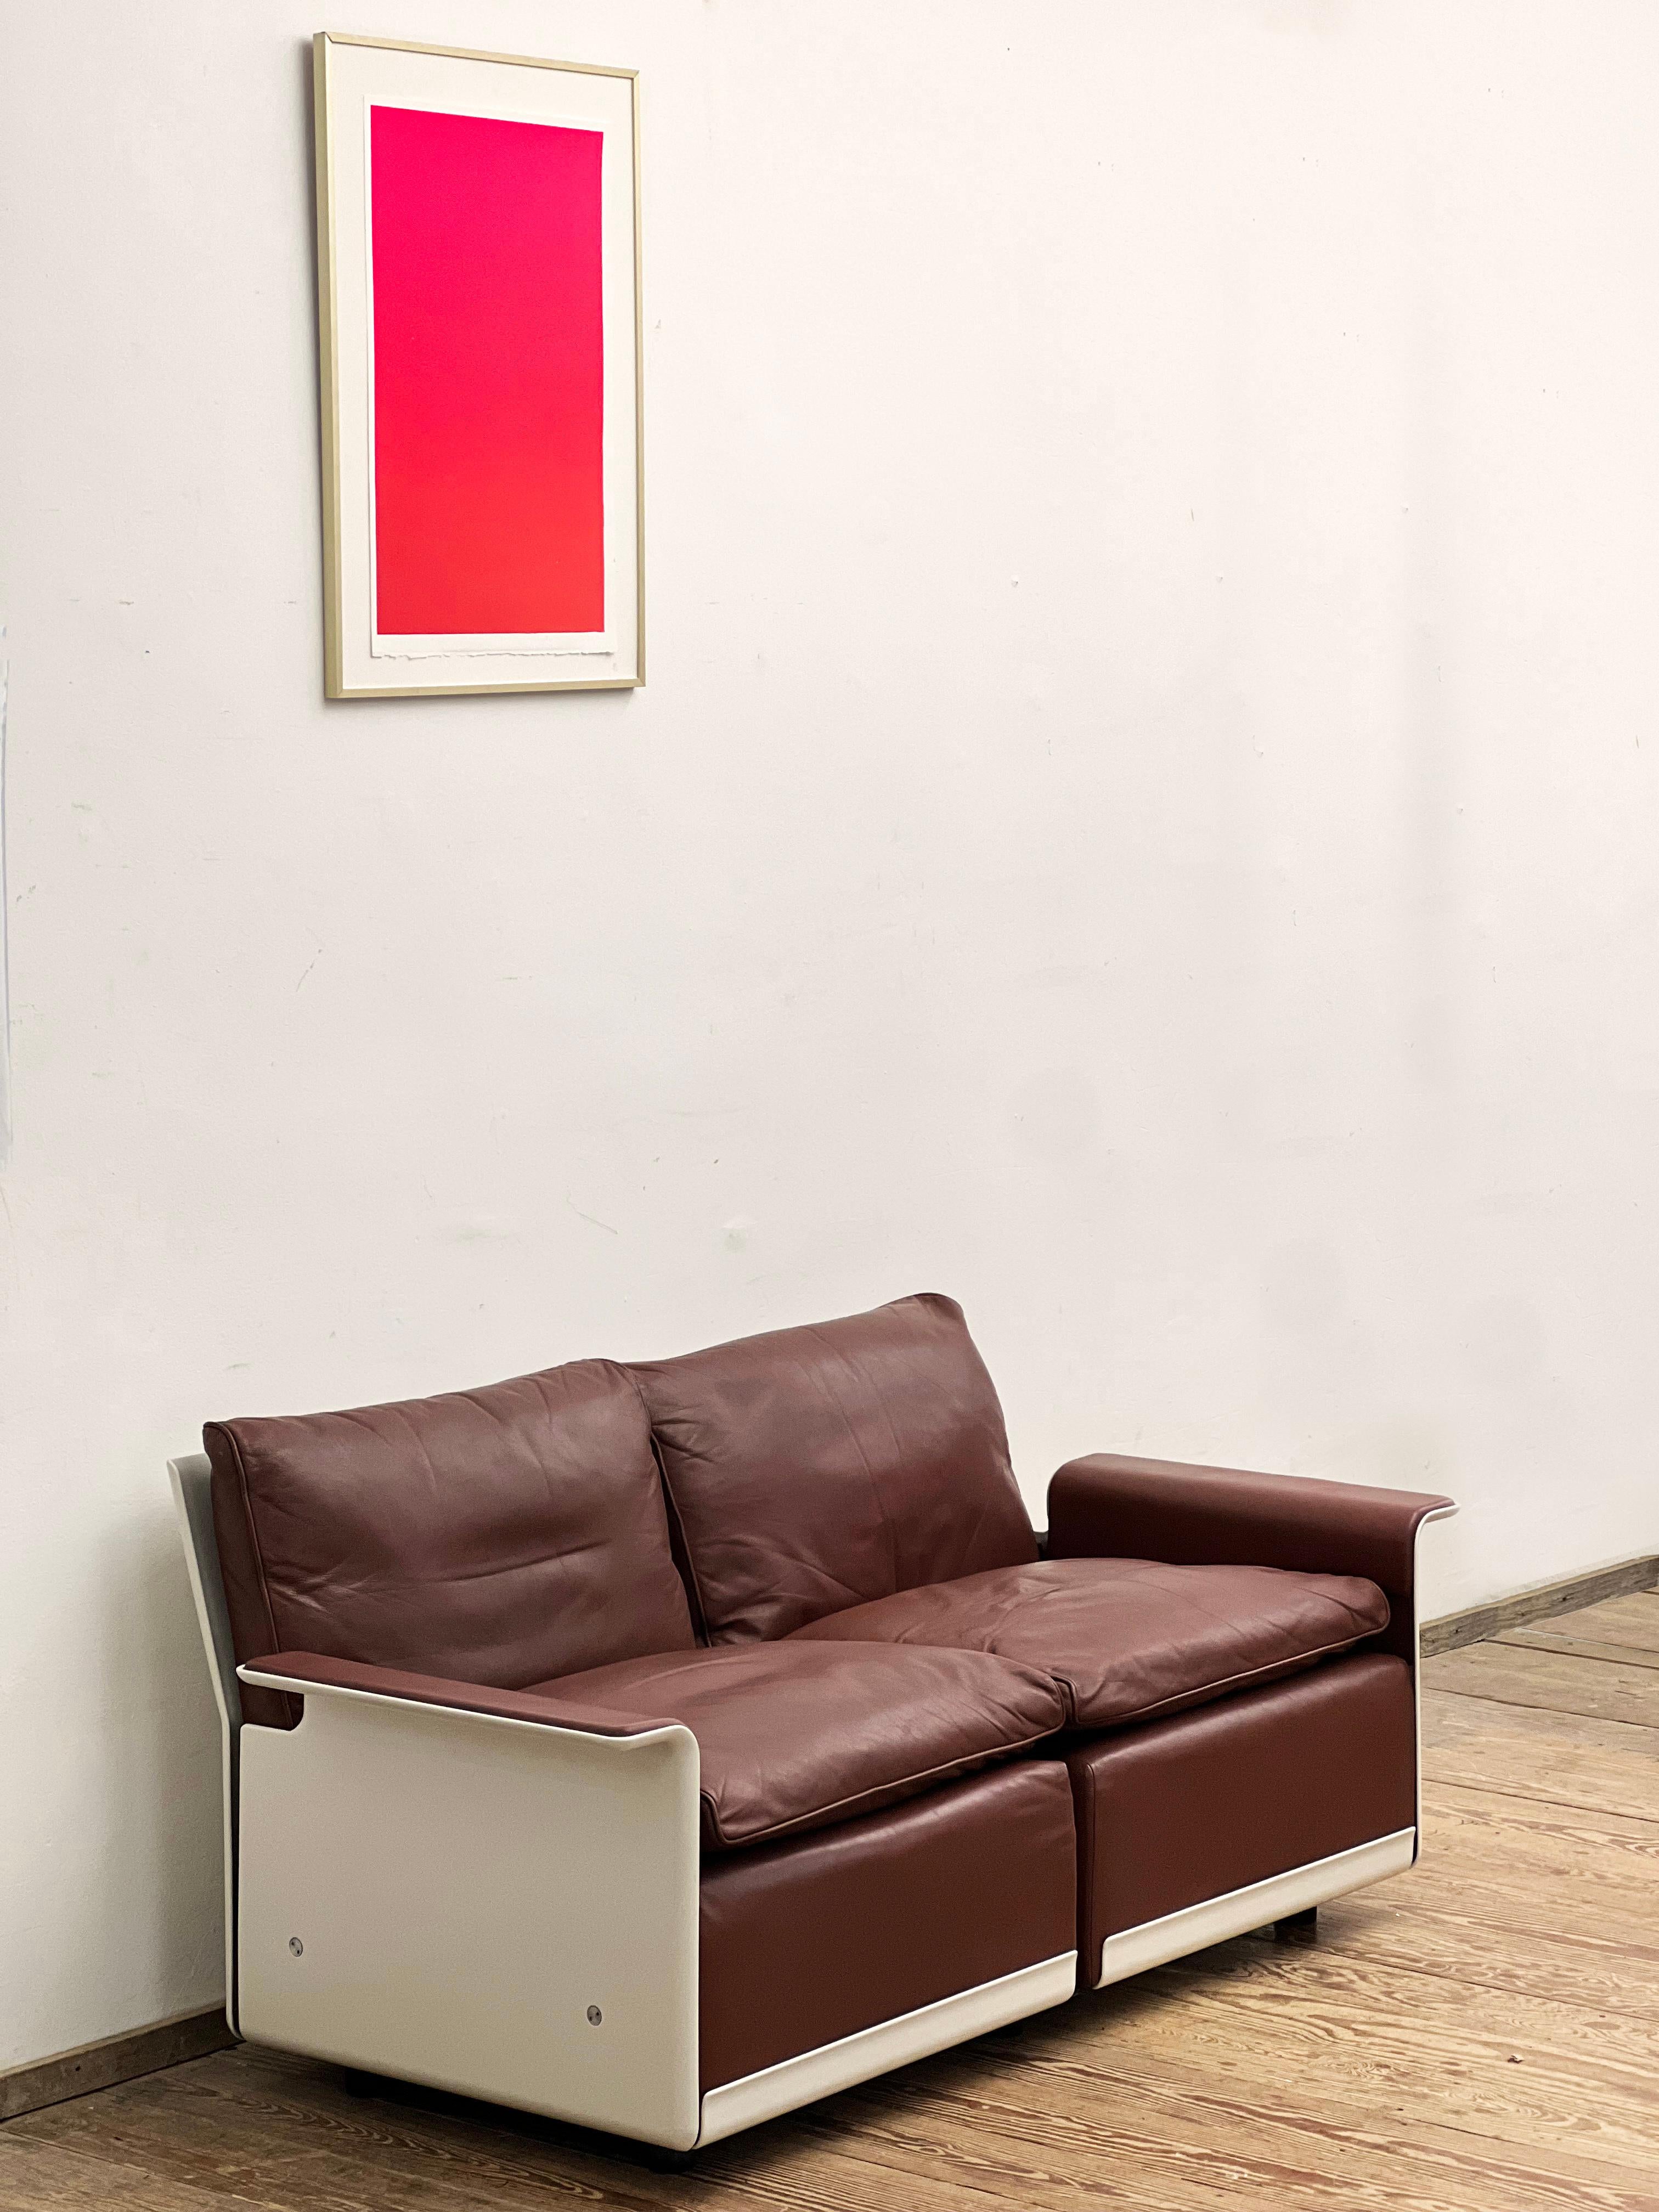 Mid-Century Lounge Sofa or Couch by Dieter Rams for Vitsoe, German Design, 1960s For Sale 13